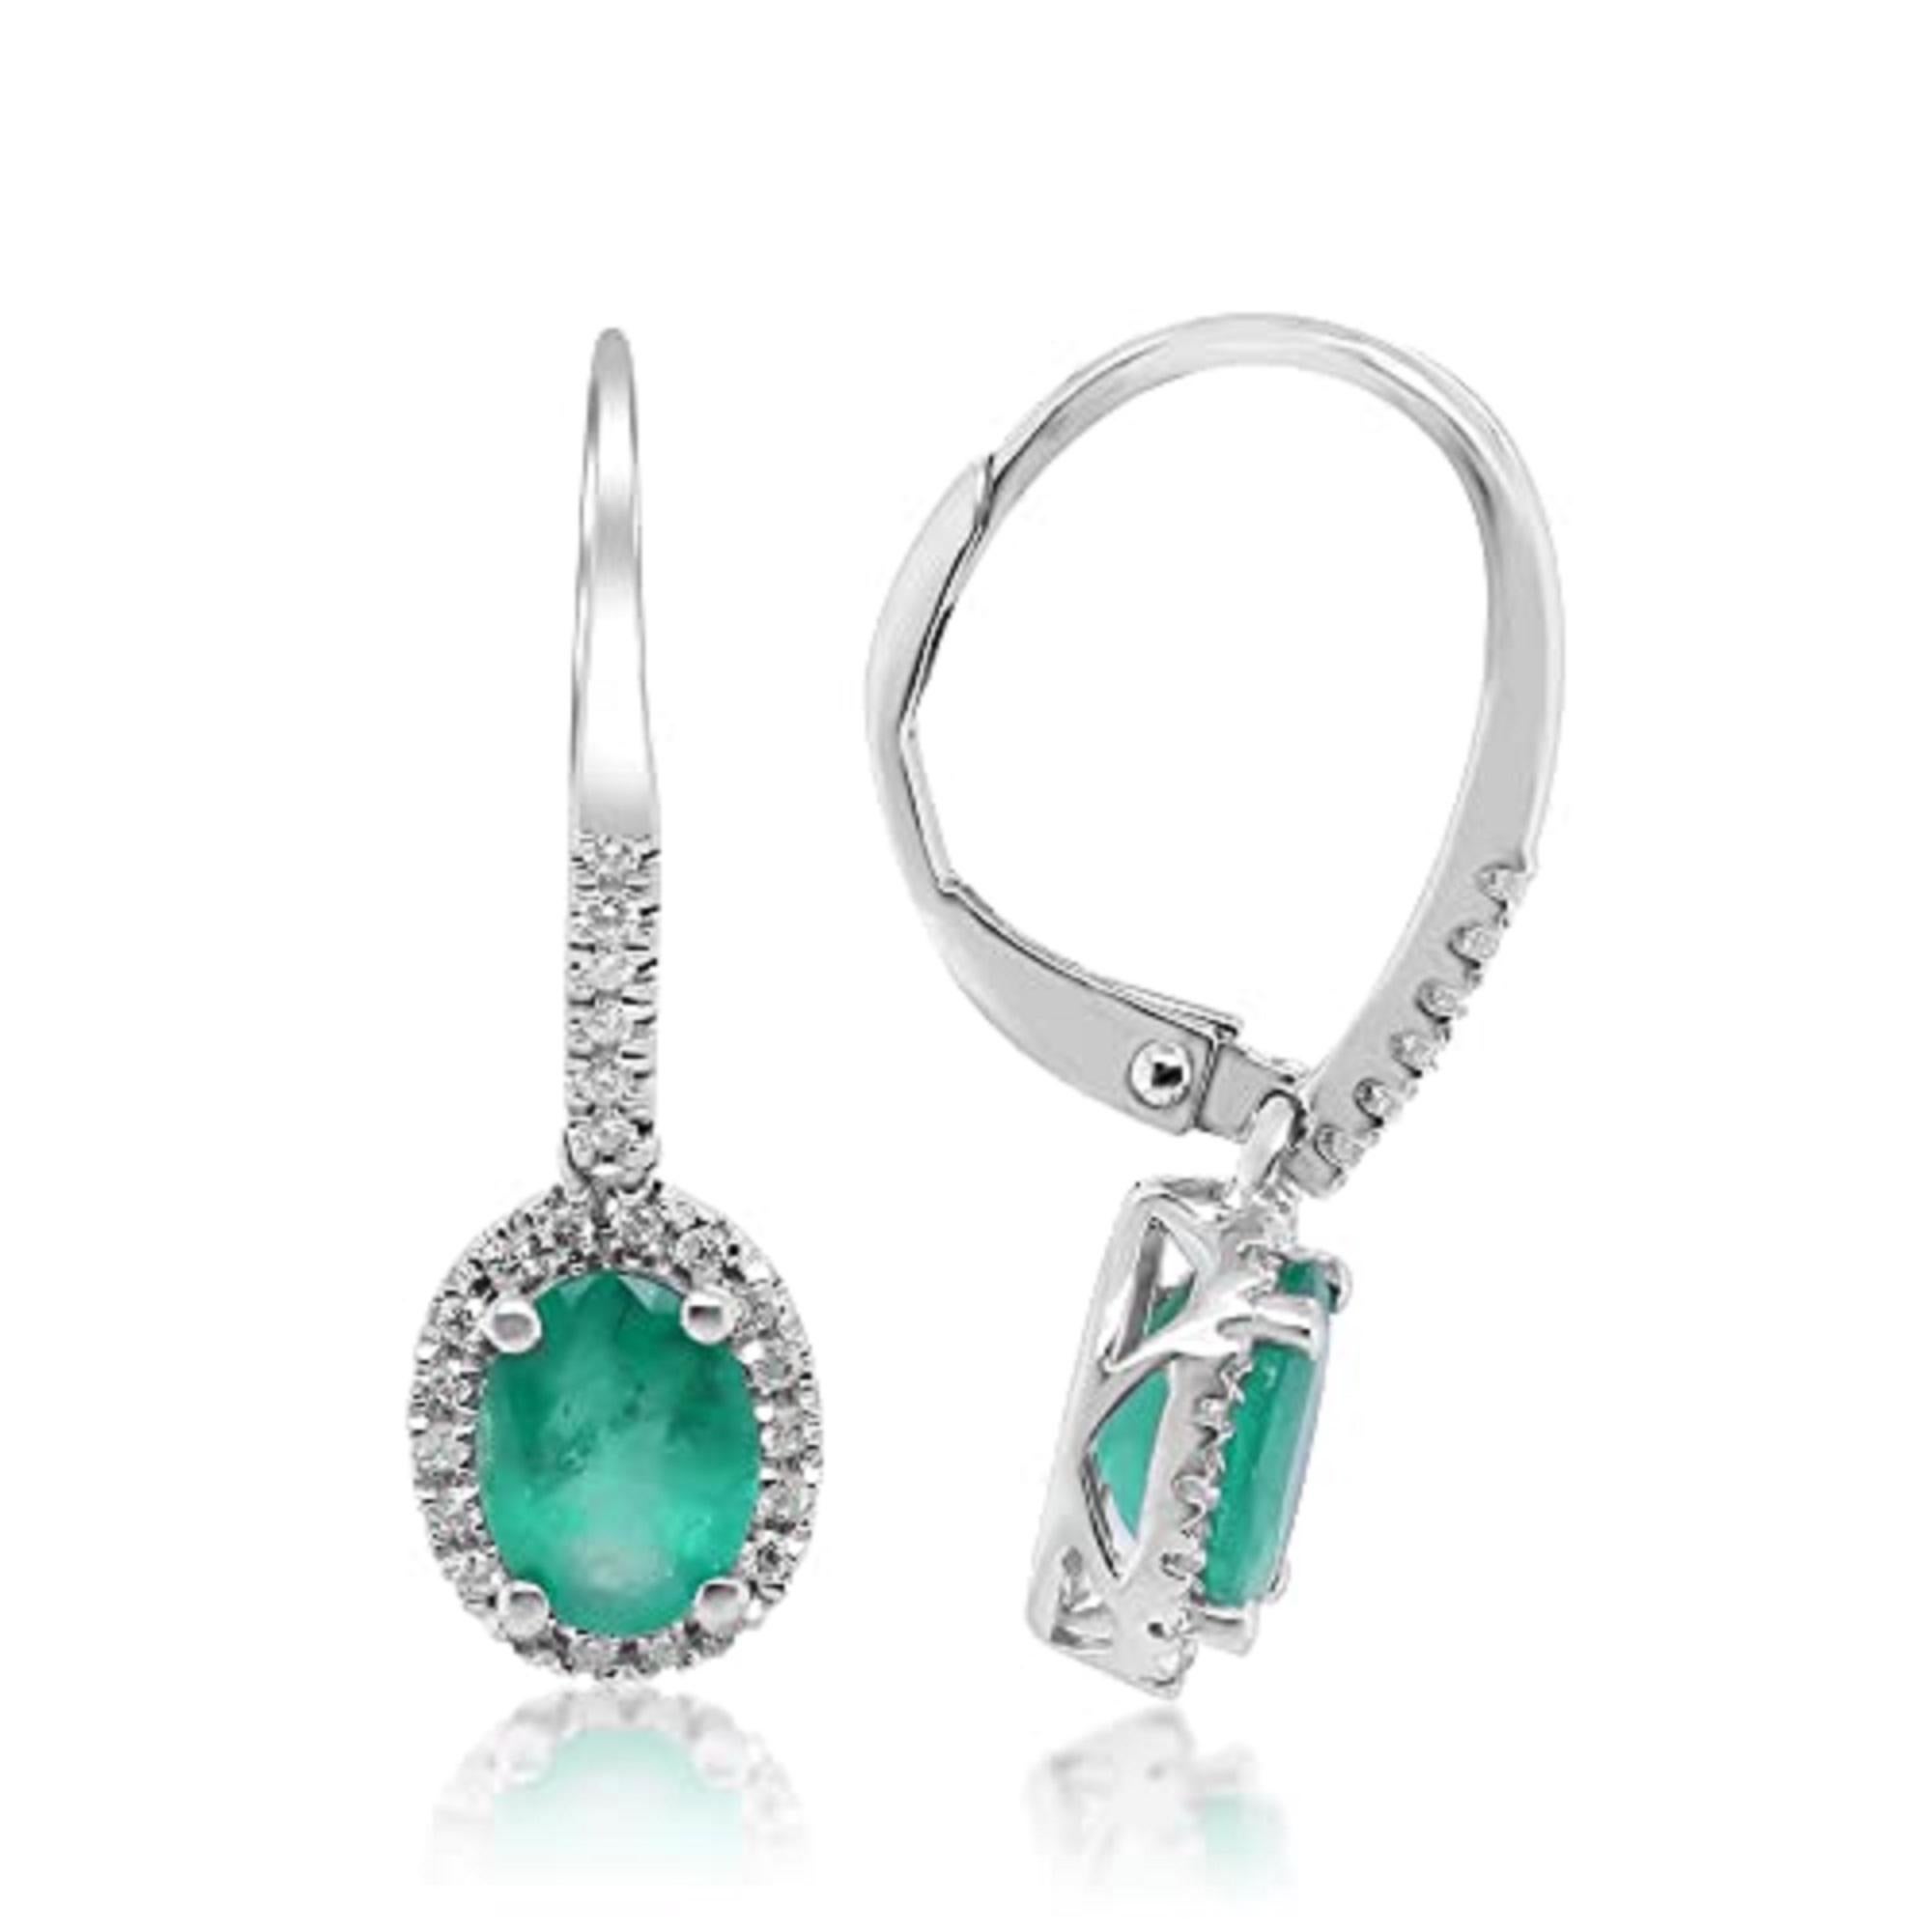 Details Crafted of 14-karat white gold, these elegant dangle earrings showcase oval-cut Gin & Grace Natural emeralds bordered by a halo of Natural white diamonds. A high polish finish and leverback clasps complete the look of these beautiful